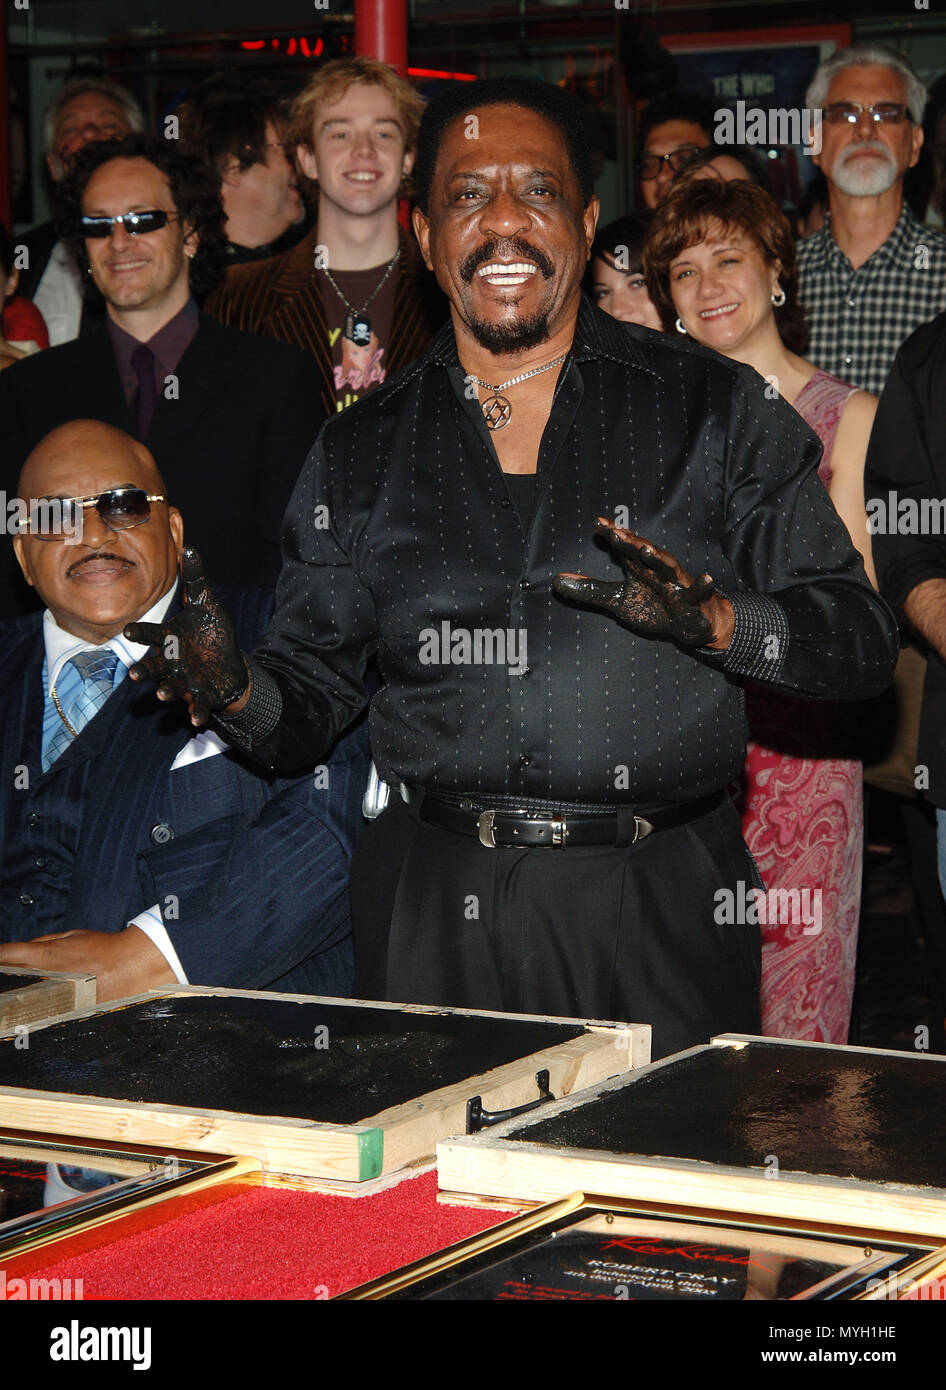 Ike Turner was Inducted on the Rock Walk of Fame at the Guitar Center ion  Los Angeles. April 4, 2005. - 28 TurnerIke023.jpg28 TurnerIke023 Event in  Hollywood Life - California, Red Carpet